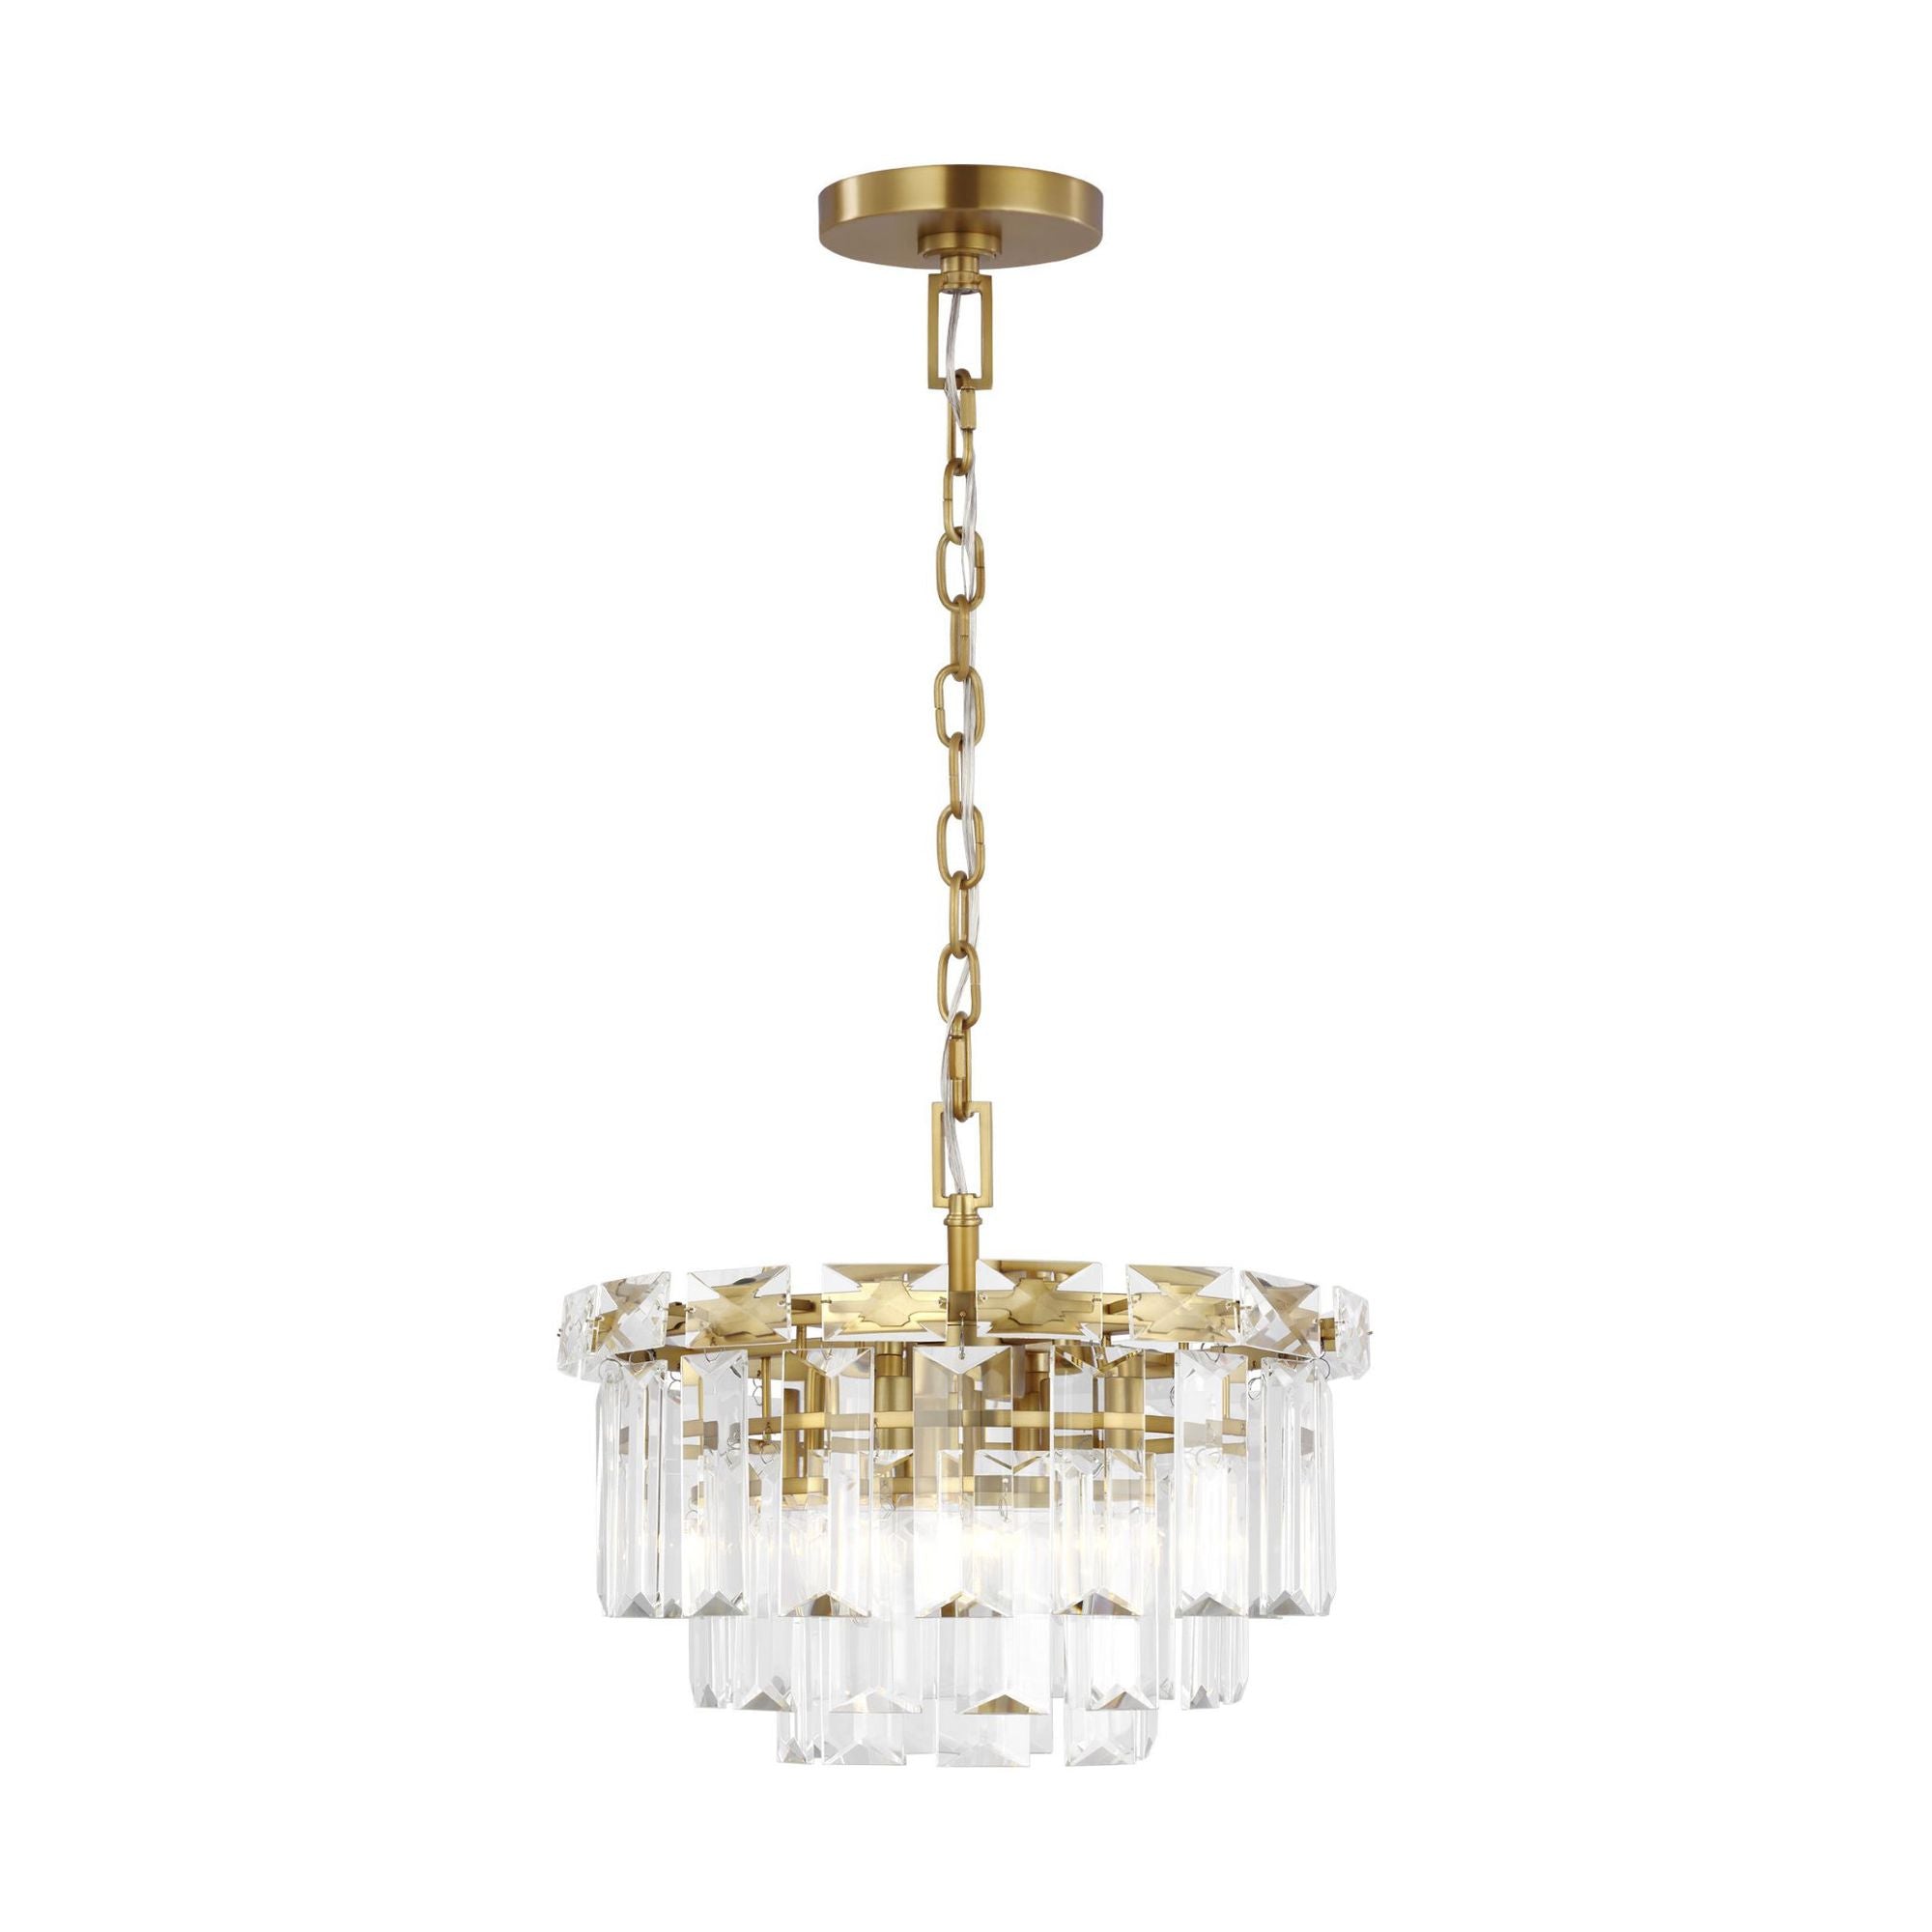 Chapman & Myers Arden Small Chandelier in Burnished Brass